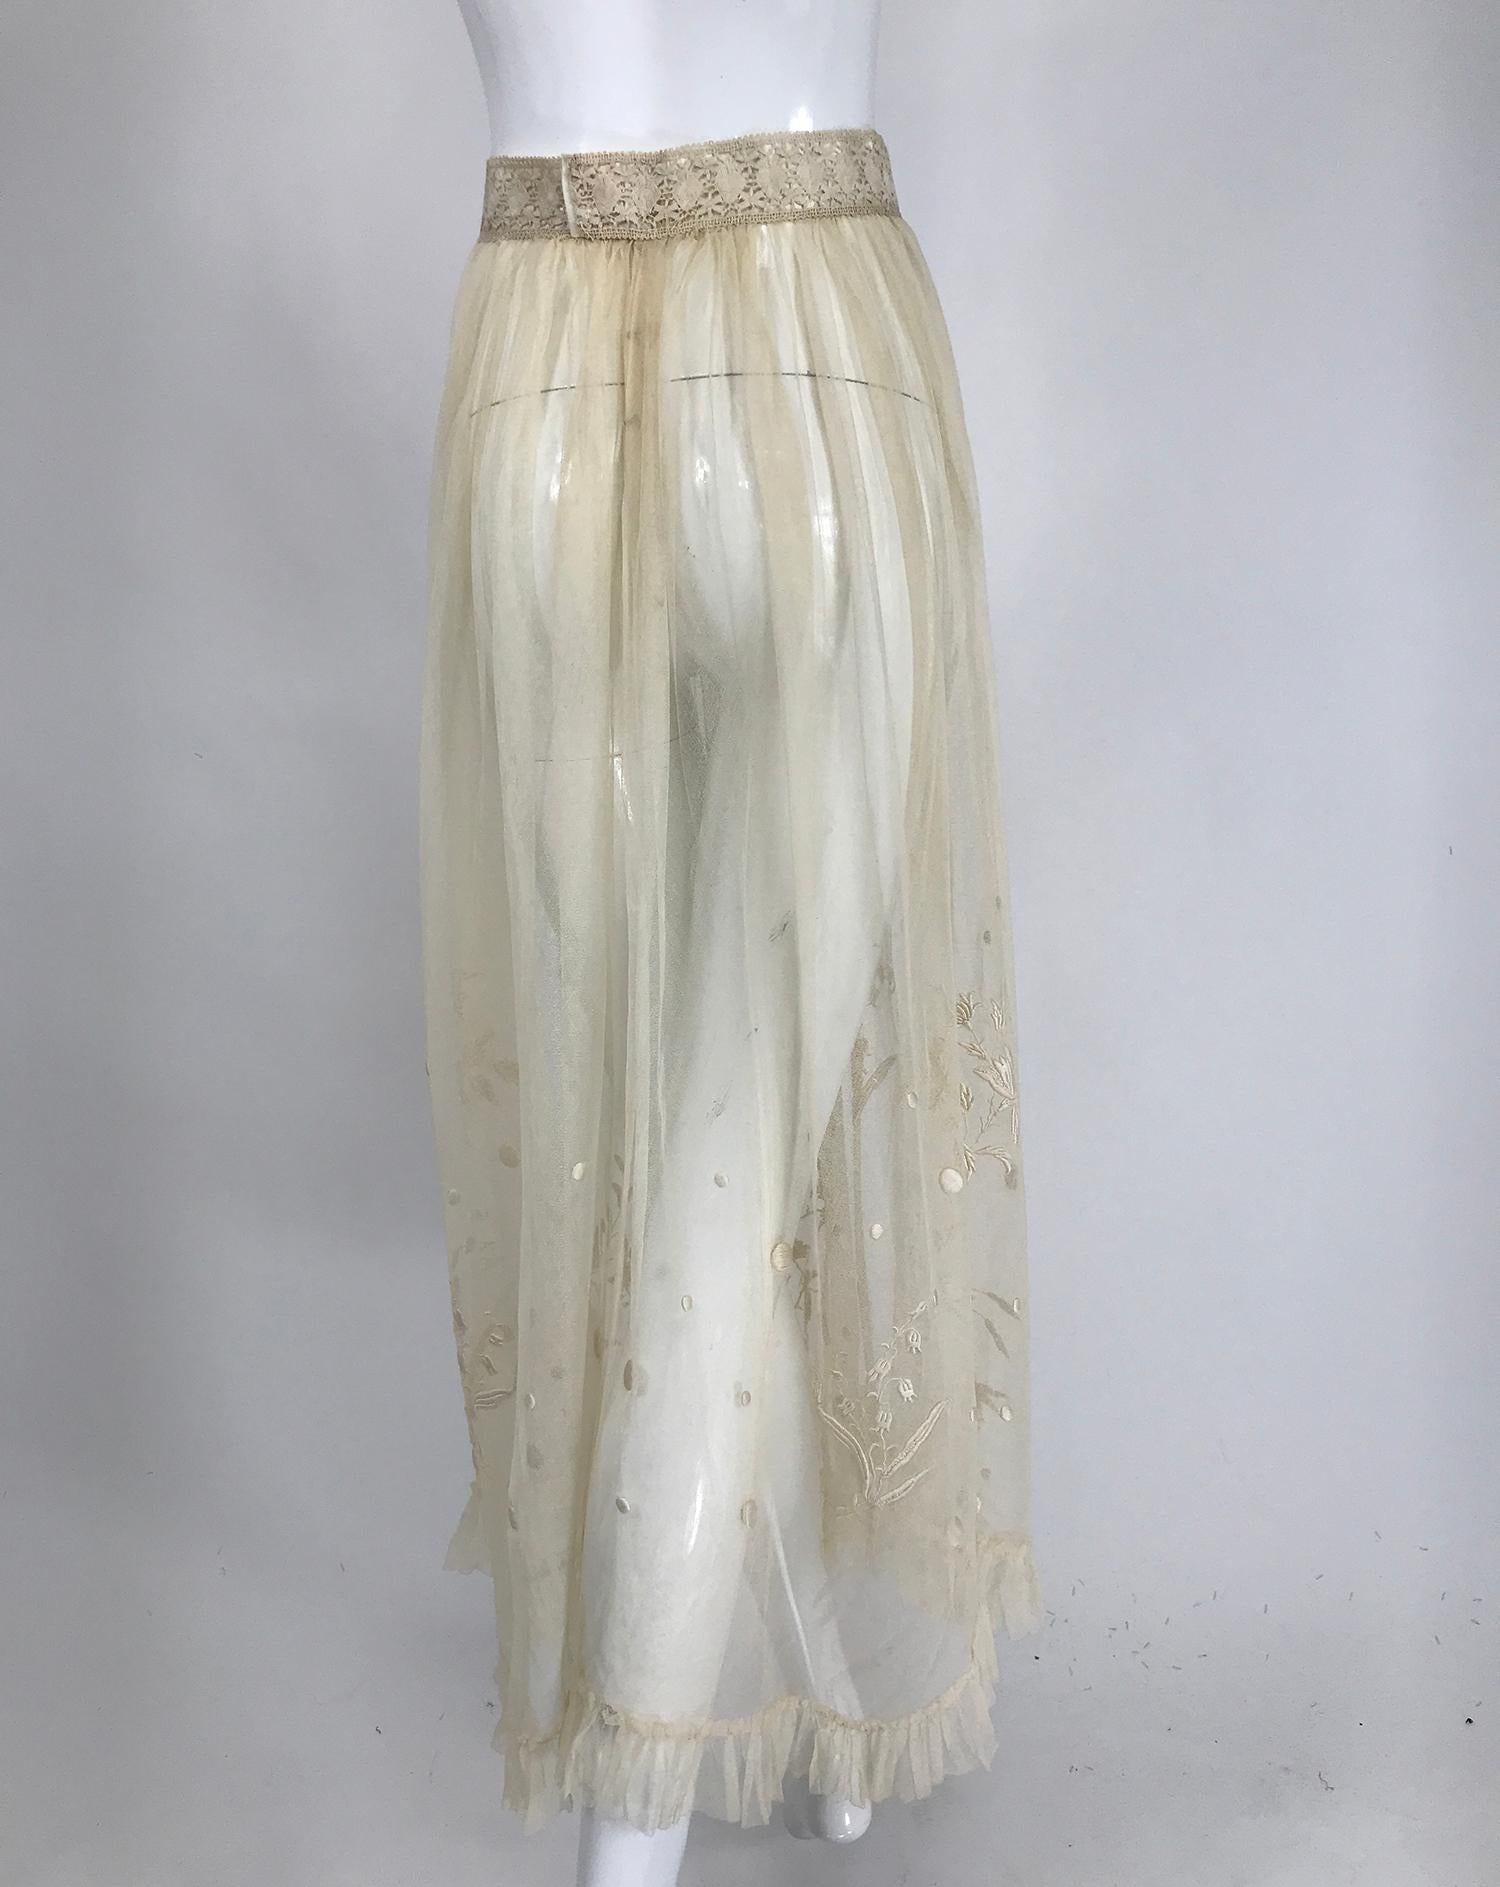 Women's Edwardian Ecru Satin Stitch Embroidered Tulle Skirt 1900s For Sale